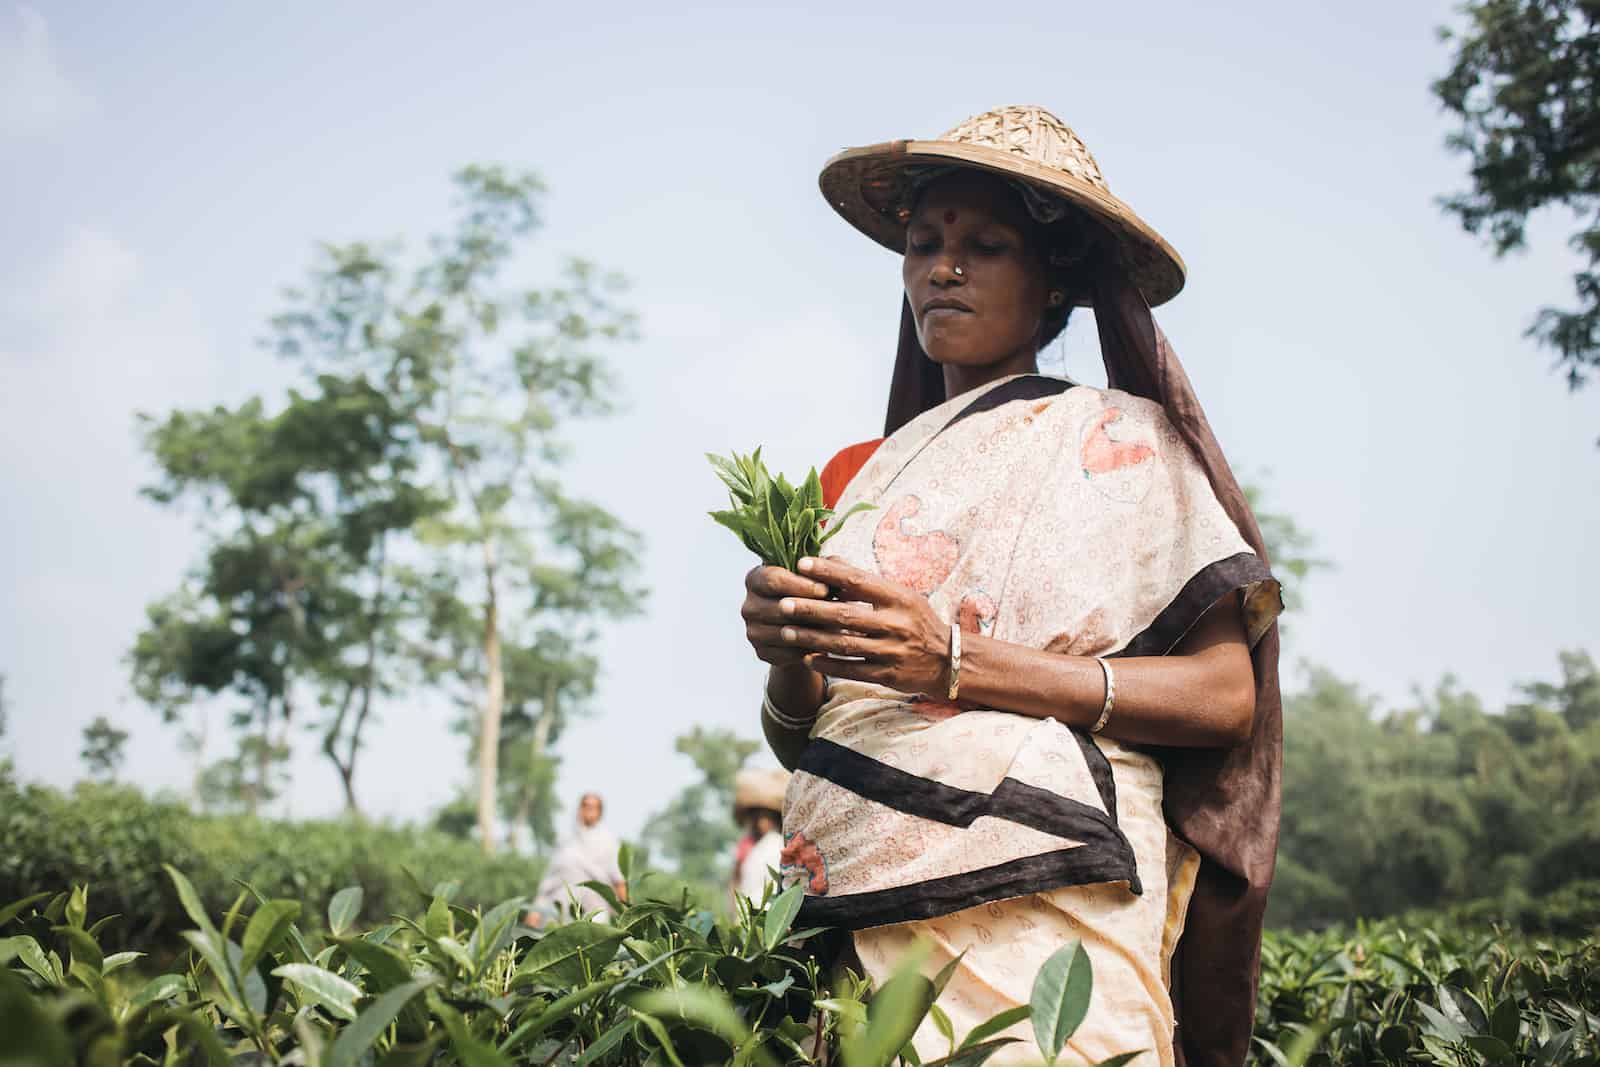 A woman stands in a field holding tea leaves in her hand, the most popular drink in the world. She wears a sari and a straw hat with a bag underneath to hold tea leaves. She stands in a large field.